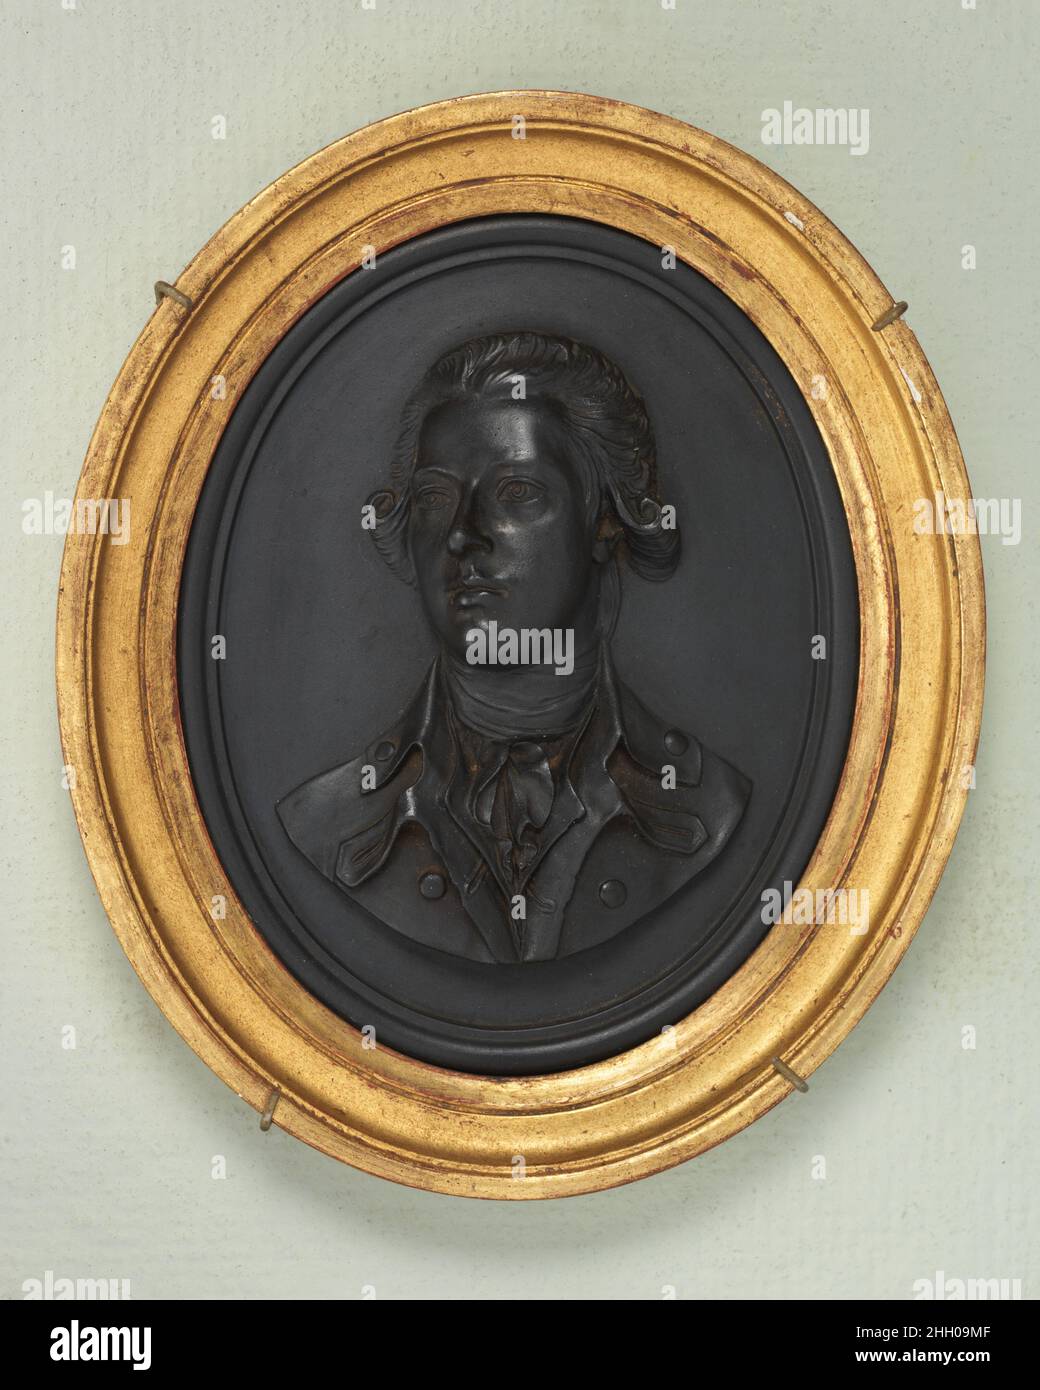 William Pitt, the Younger ca. 1787 Wedgwood and Co. Cameo medallions with portrait reliefs were made by Josiah Wedgwood between 1765 and 1795, with Thomas Bentley as his partner from 1769 to 1780. Black basalt and jasper are both types of fine stoneware hard enough for the delicate modeling which distinguishes Wedgwood's portrait cameos of 'Illustious Ancents and Moderns.'. William Pitt, the Younger. British, Etruria, Staffordshire. ca. 1787. Black basalt ware. Wedgwood and Co.. Ceramics-Pottery Stock Photo